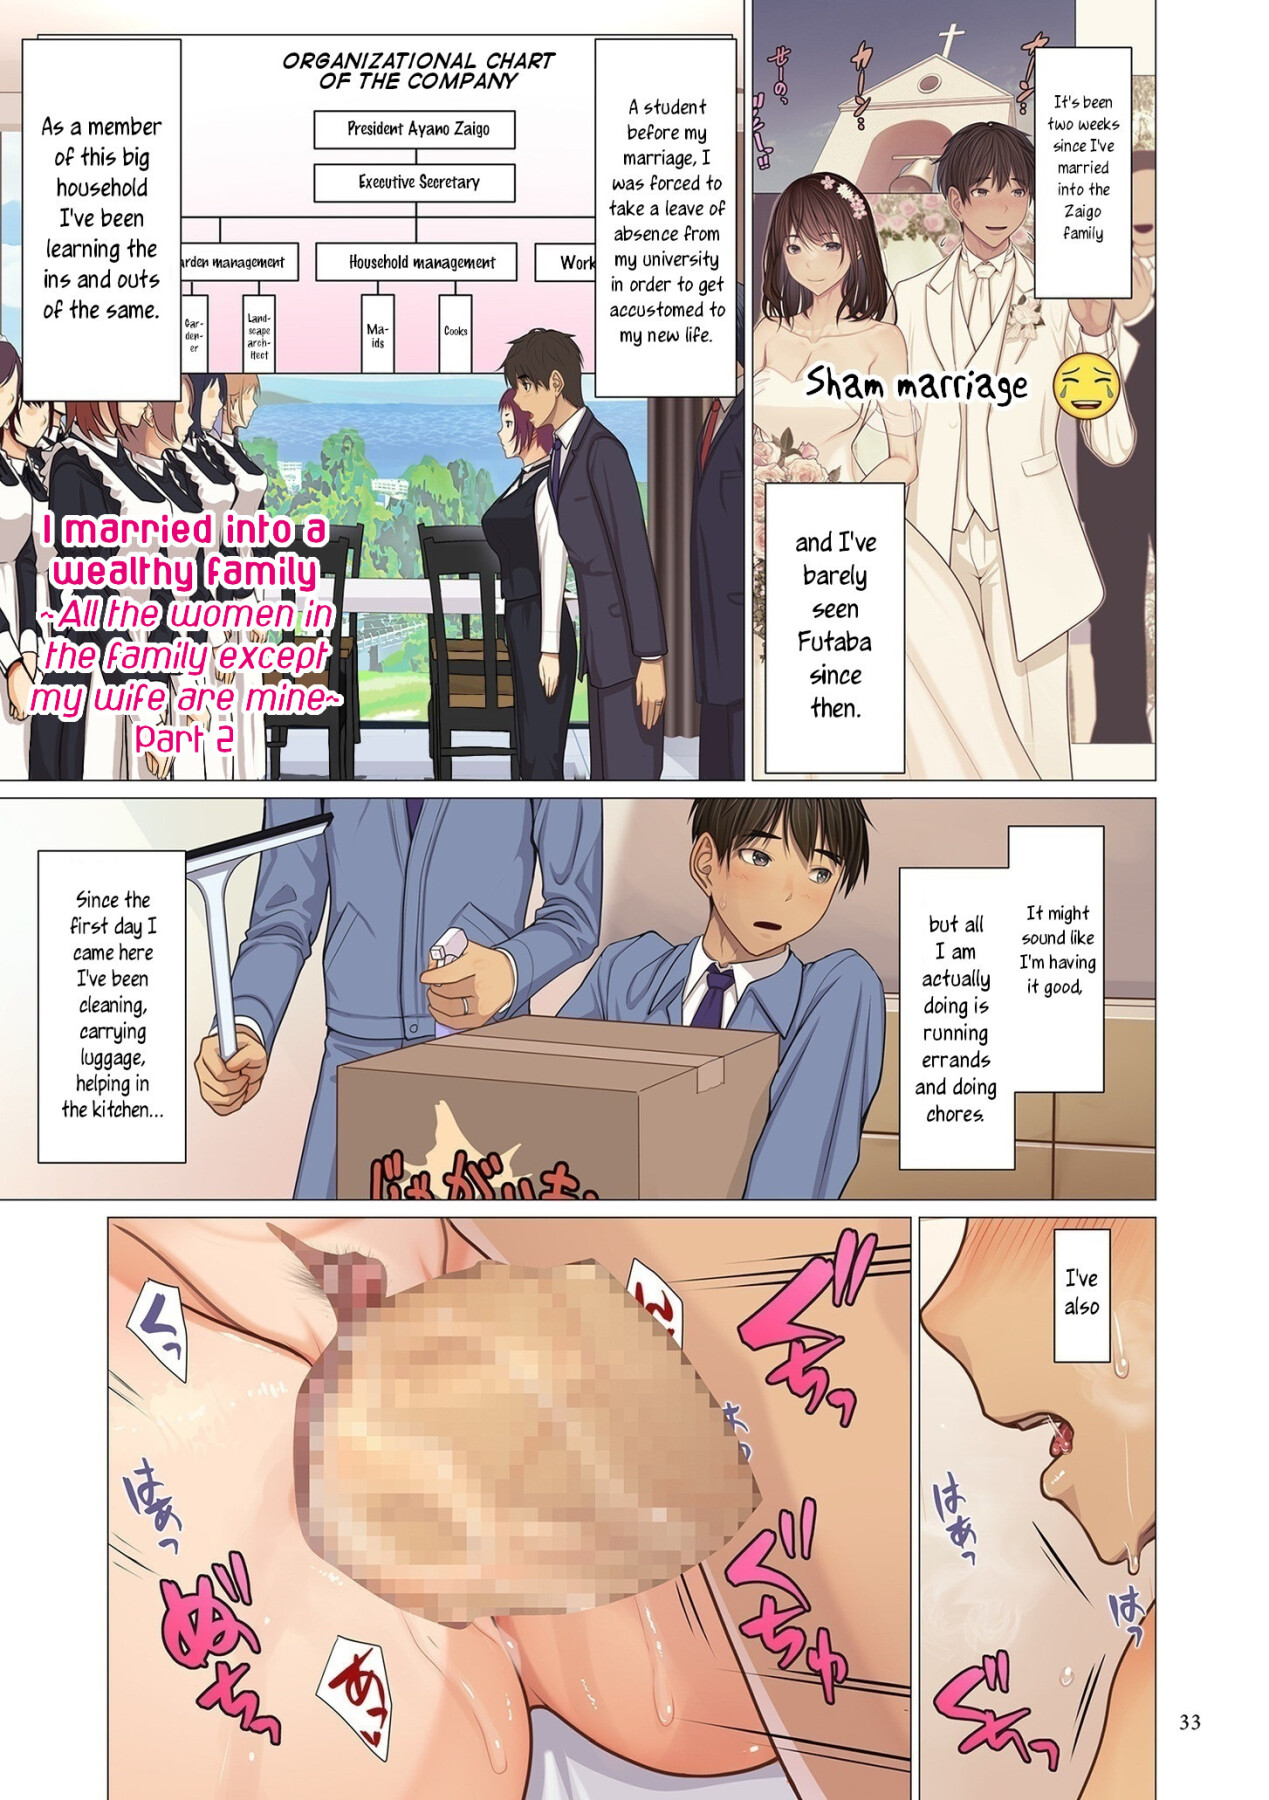 Hentai Manga Comic-I married into a wealthy family,-Chapter 2-1